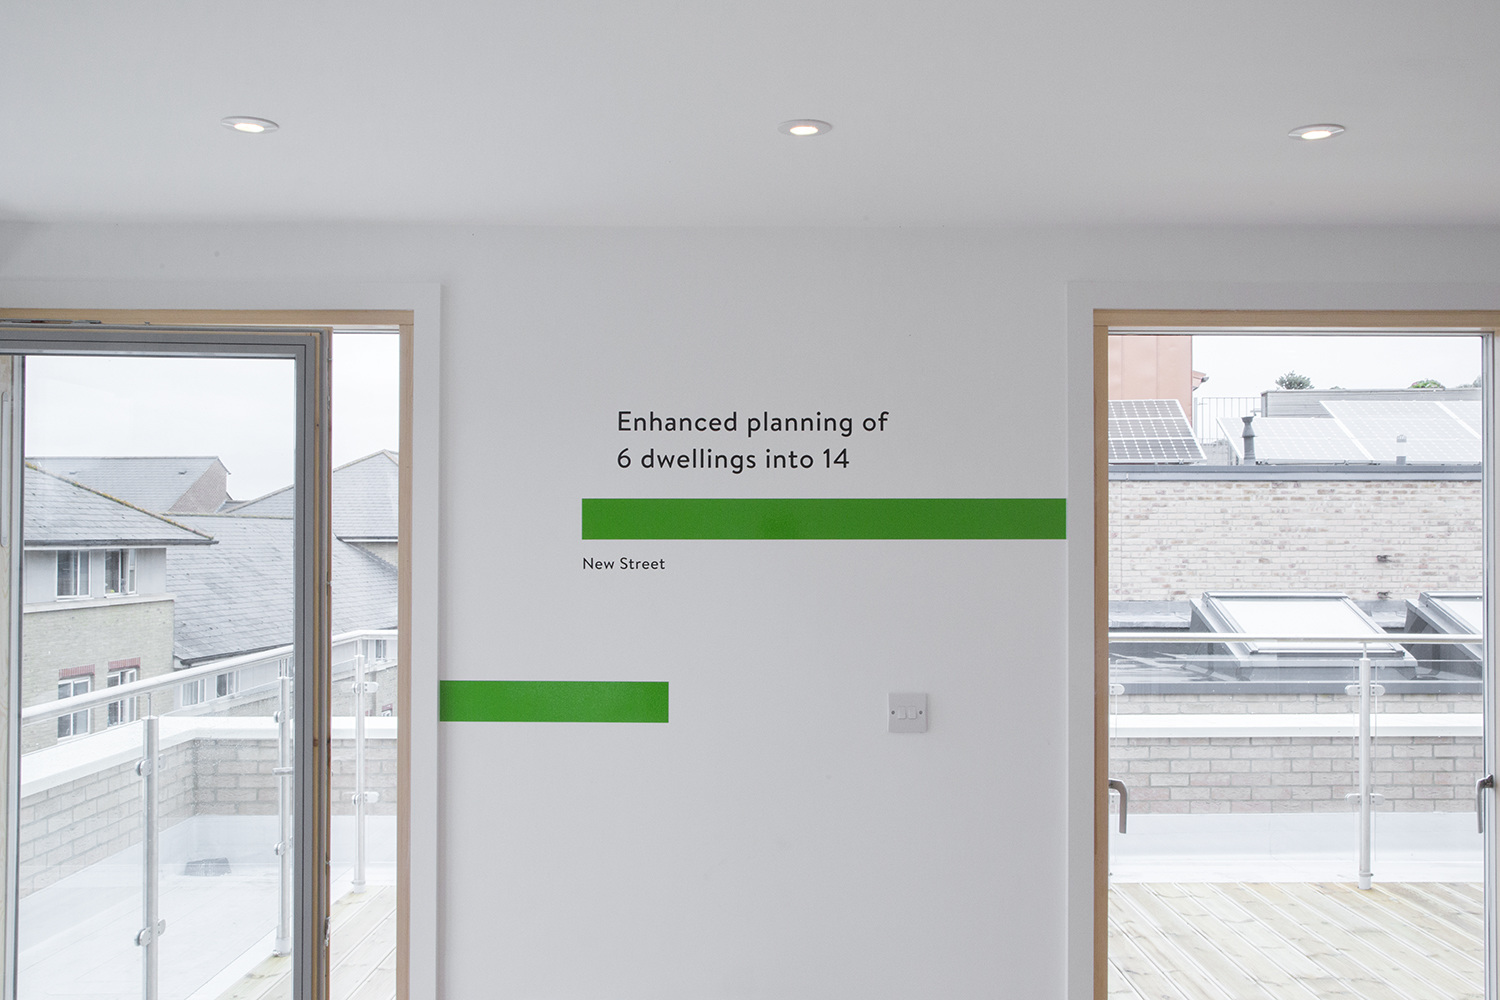 Branding and wayfinding for commercial and residential property developer Learig designed by The District, United Kingdom